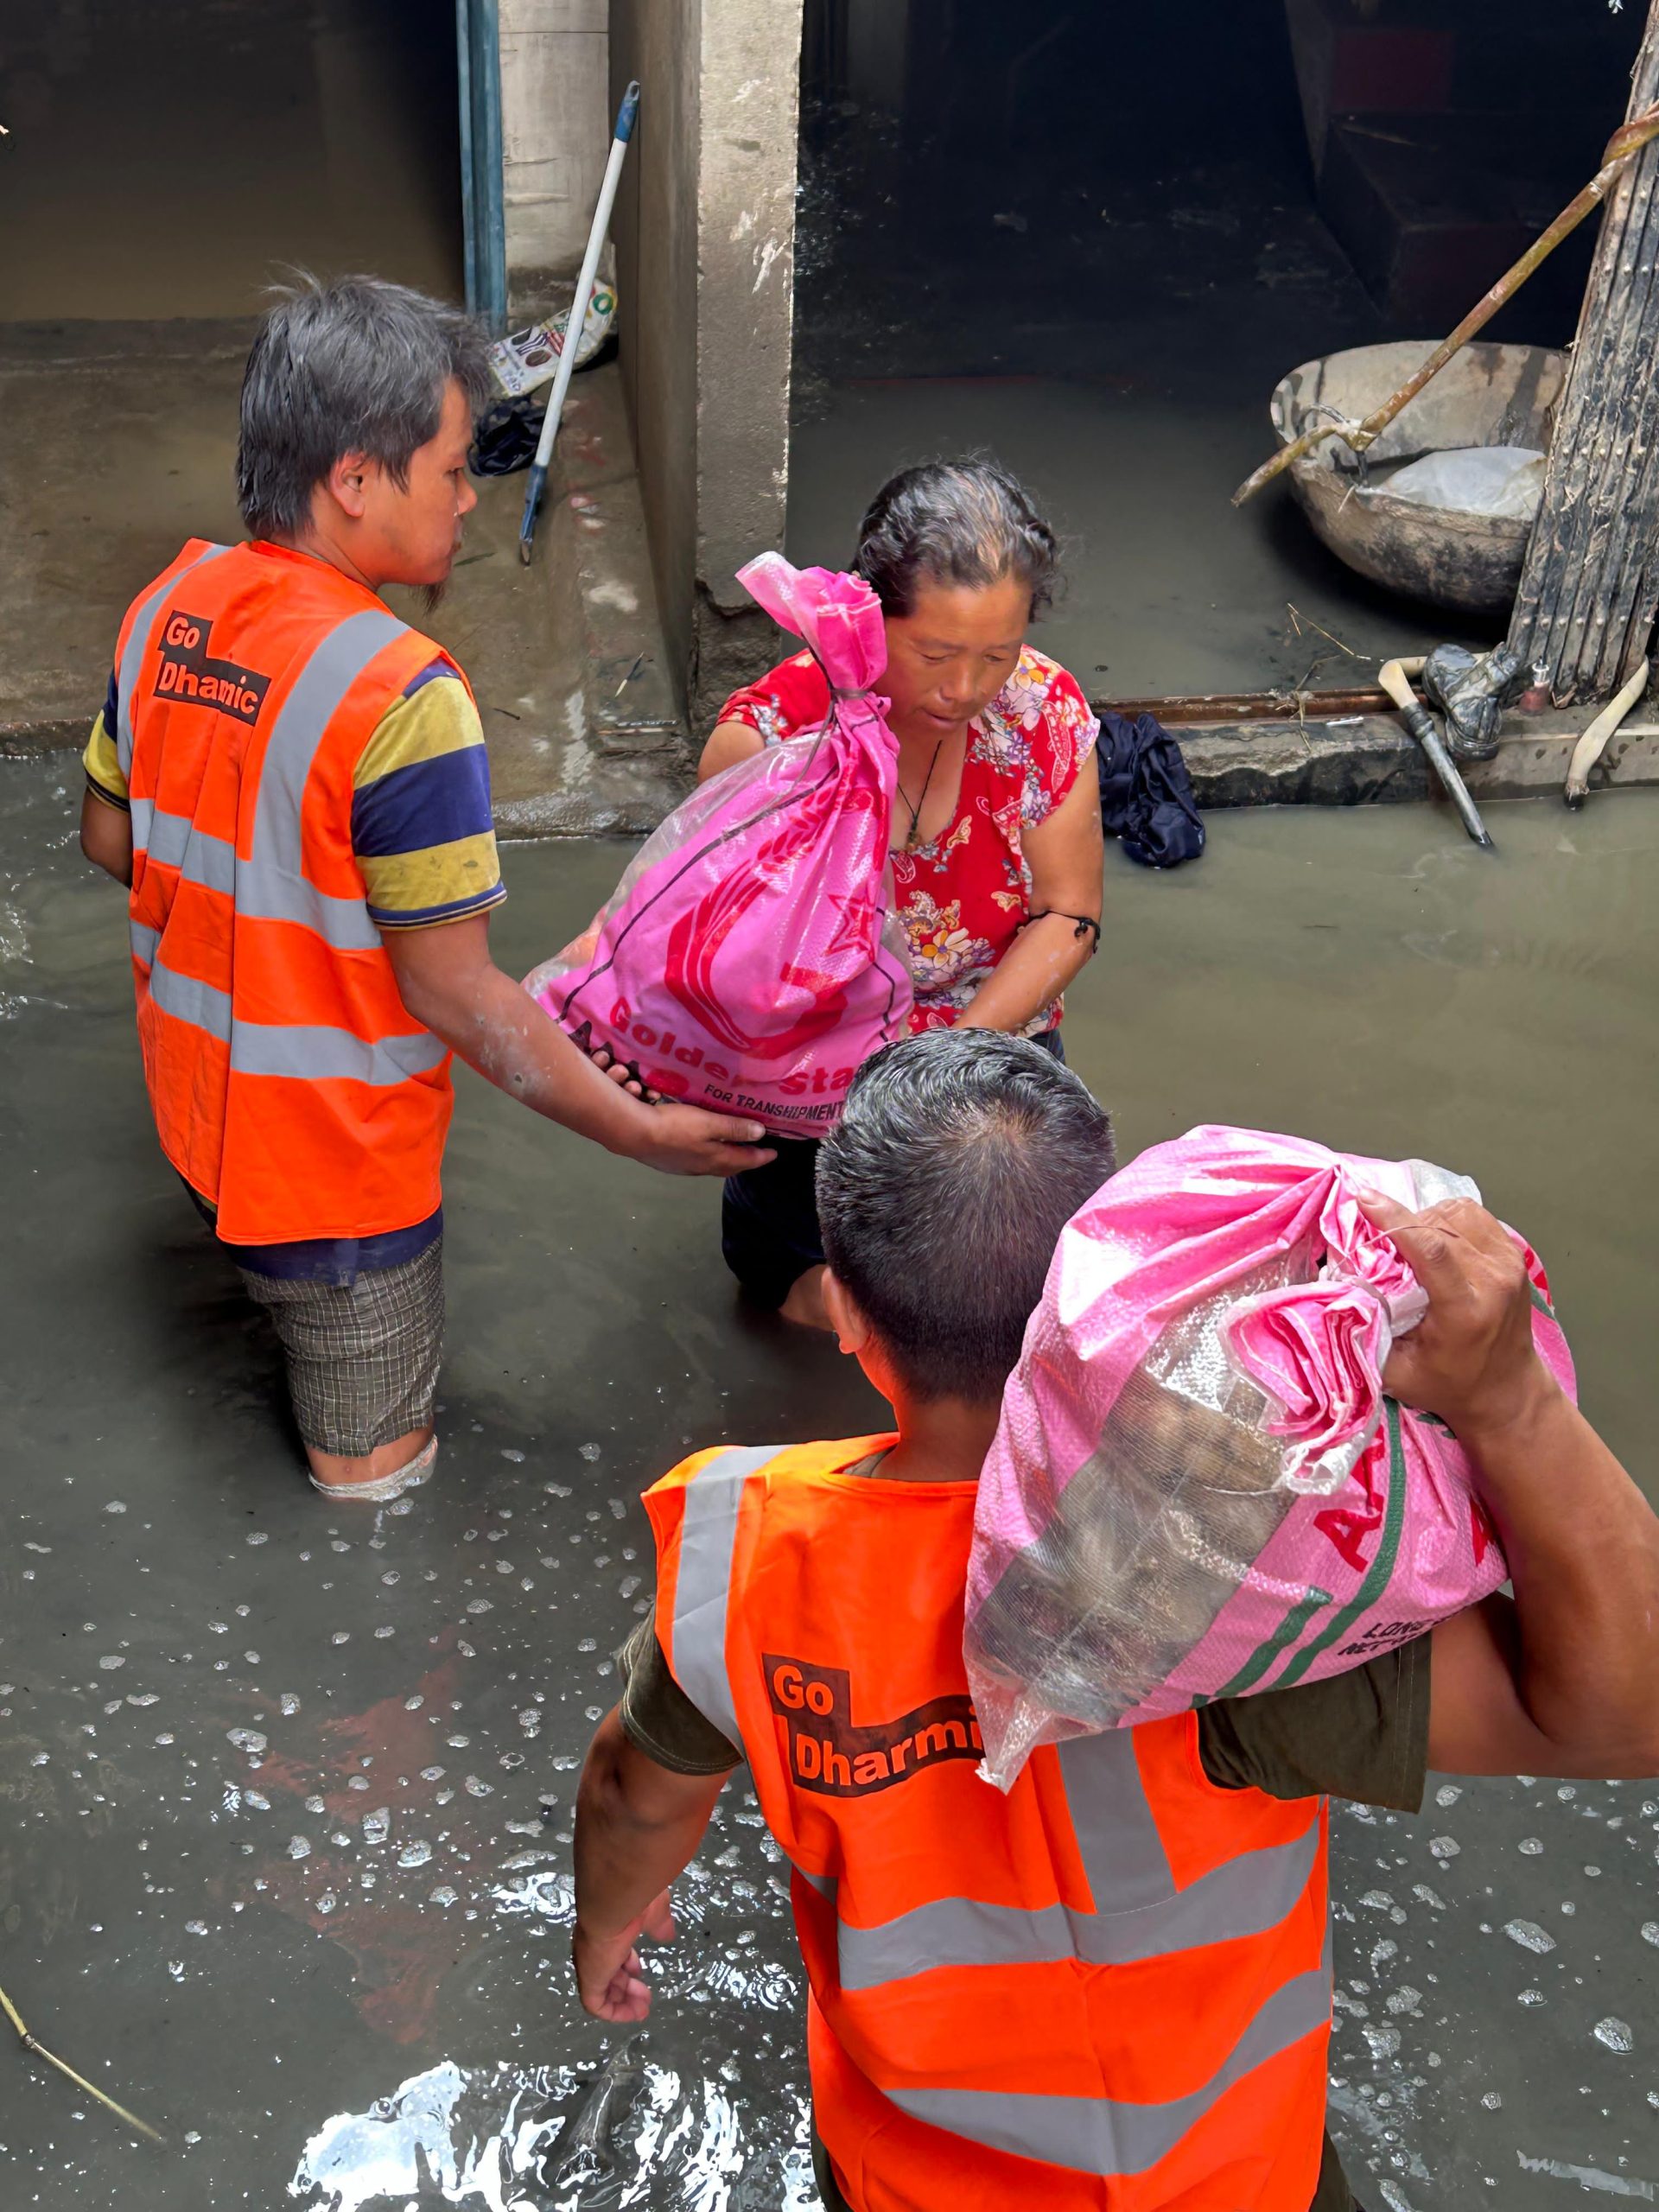 Sewa Bharati and Go Dharmic join hands to Provide Relief in Flood-Affected Imphal East